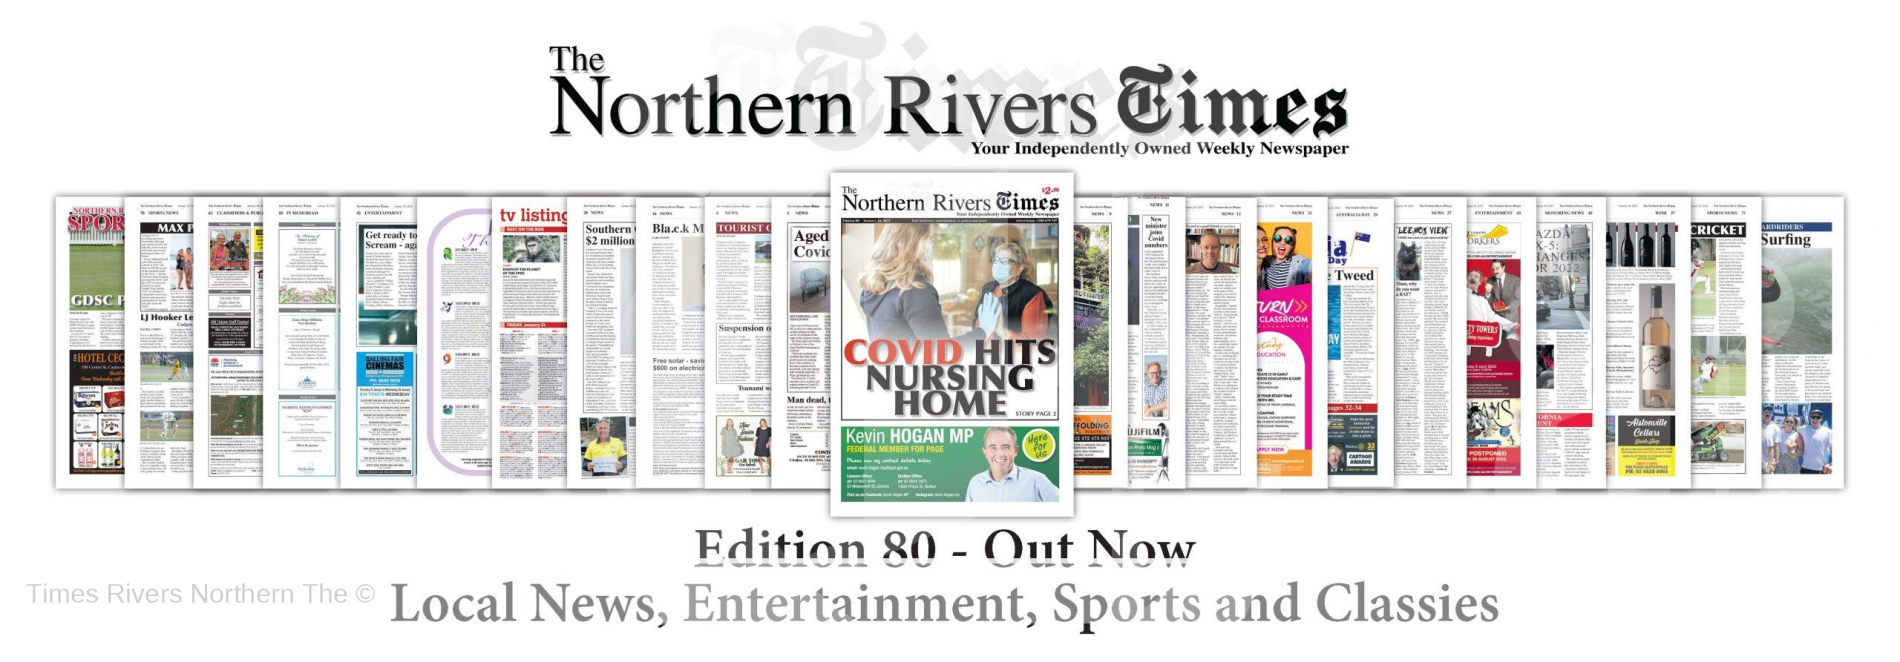 The NSW Northern Rivers News